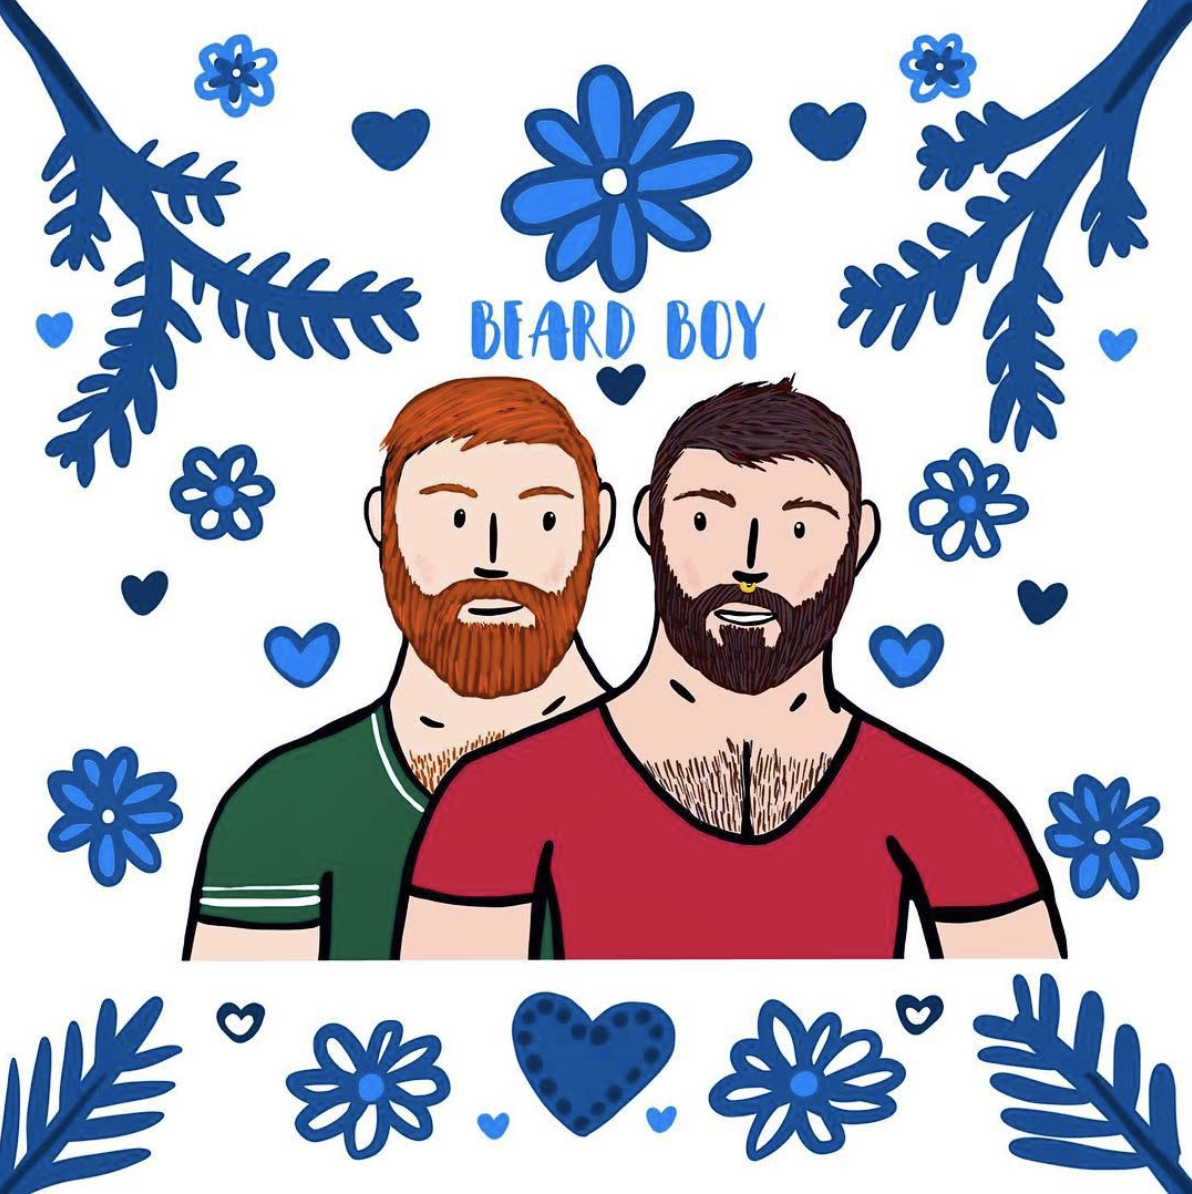 Beard Boy second art piece of Couple of Men Gay Artwork on Instagram: our favorite art pieces of Couple of Men